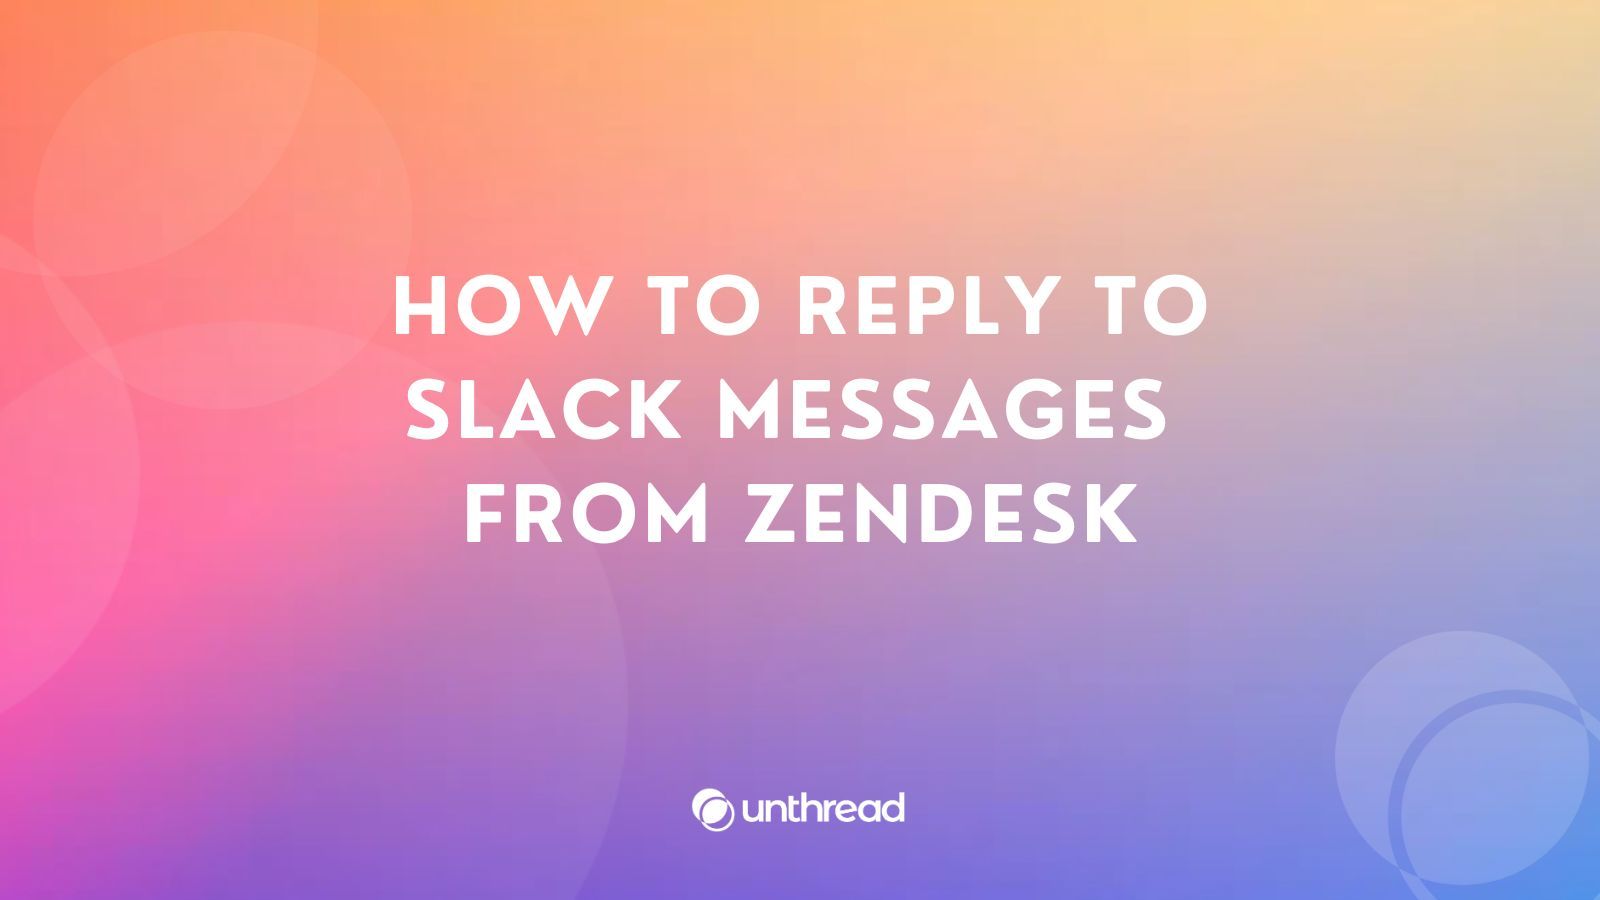 How to Reply to Slack Messages from Zendesk